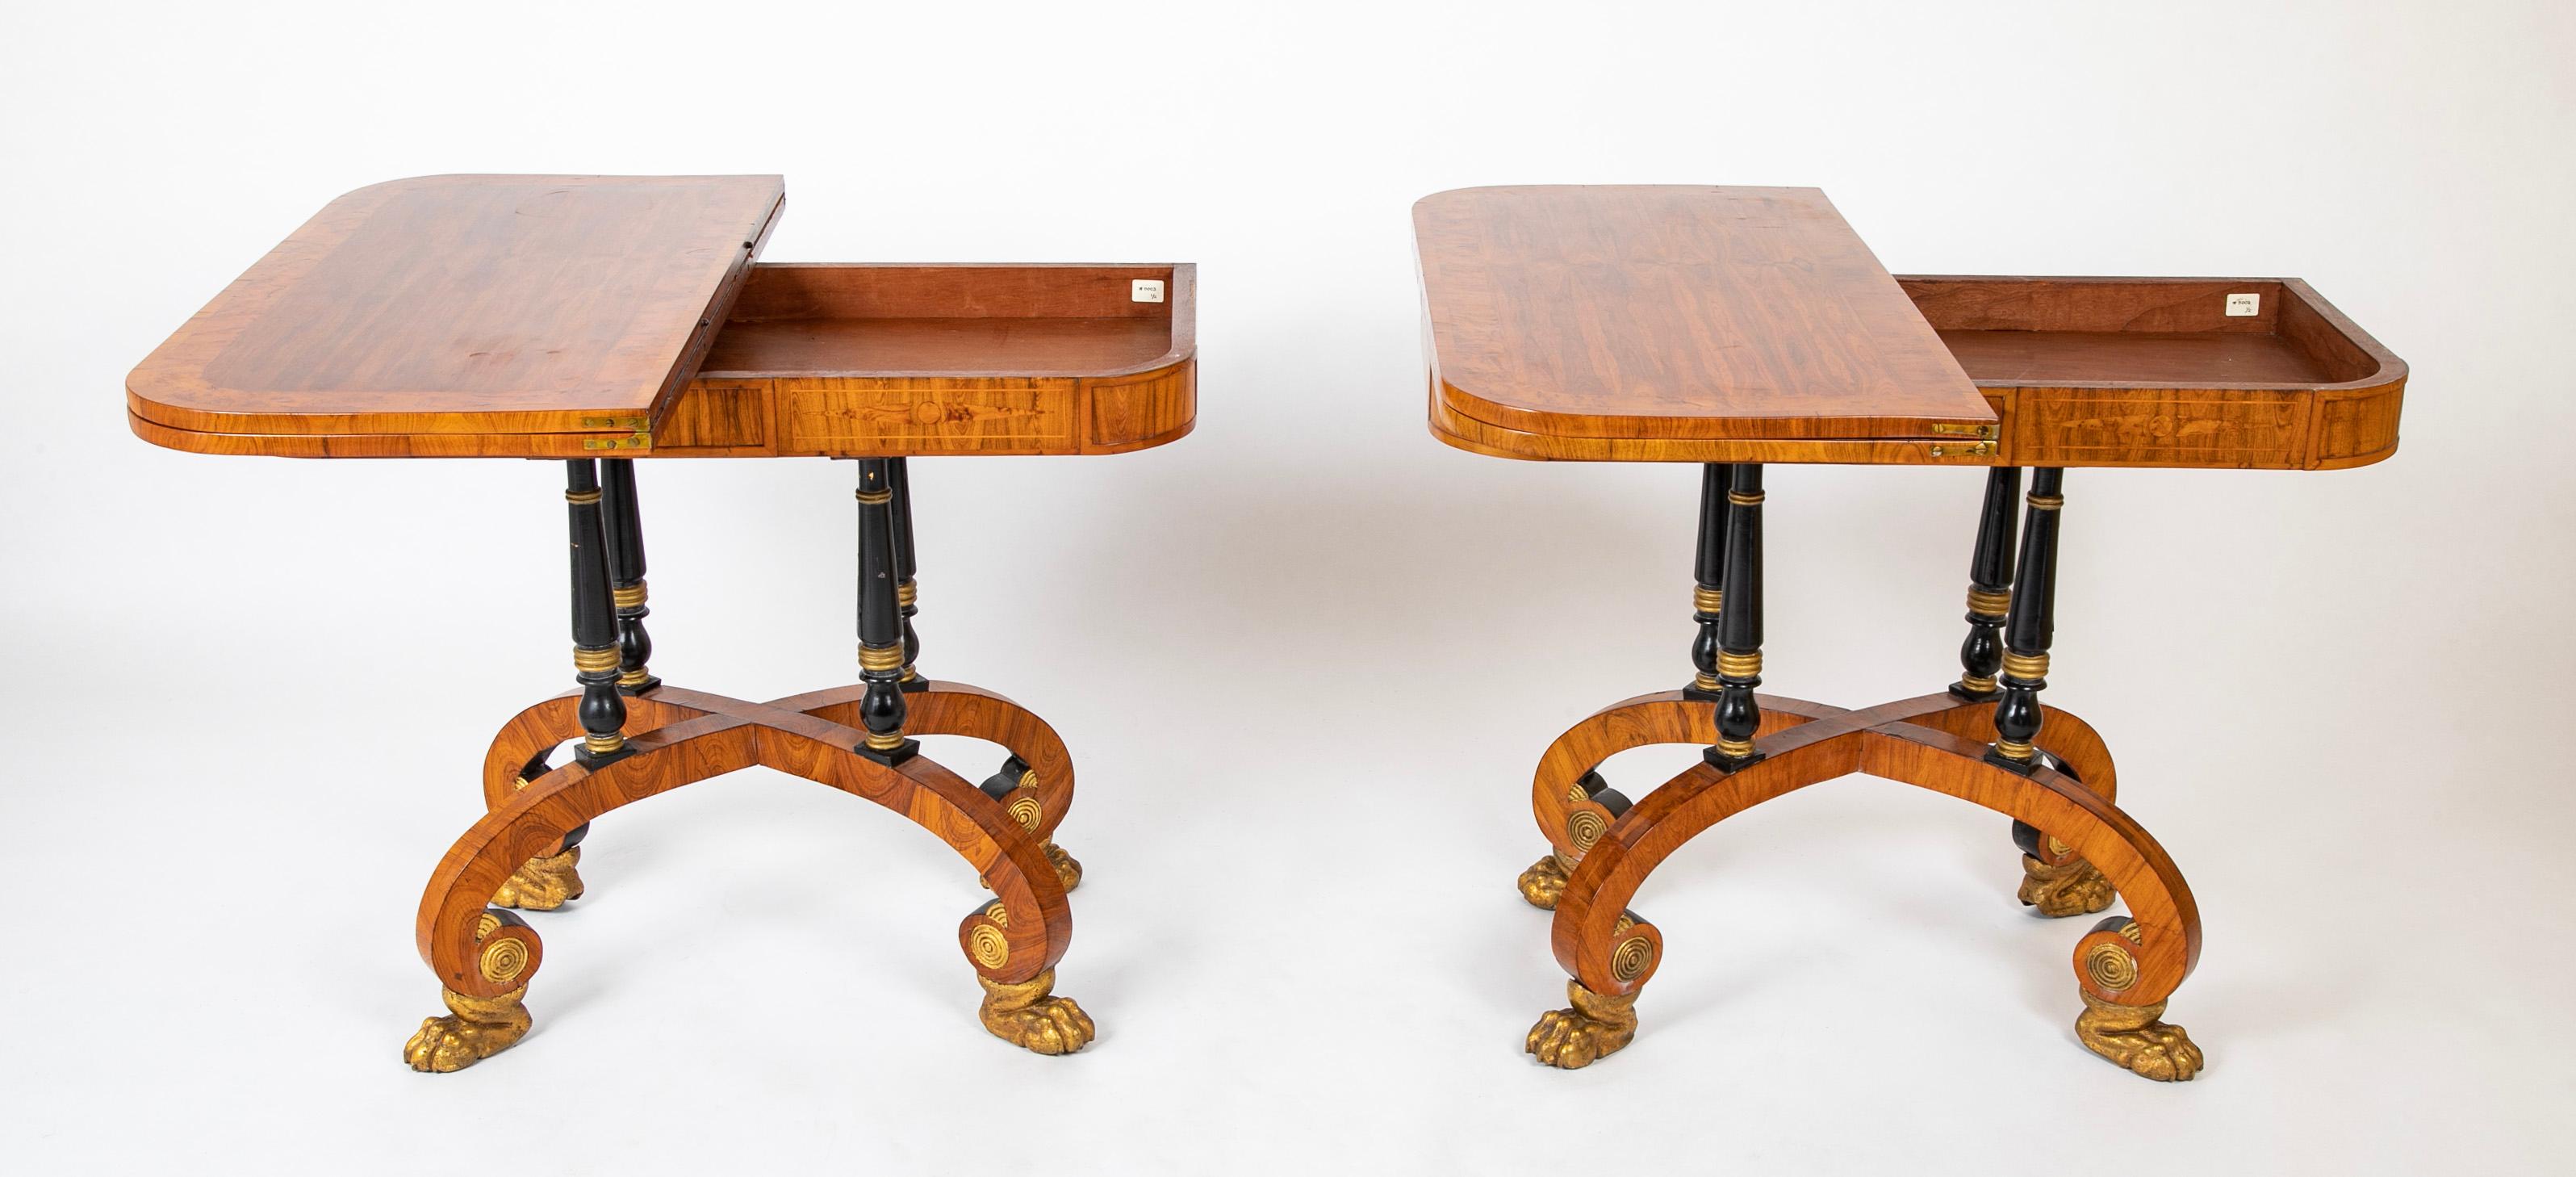 Rare Regency Pair of Games Tables For Sale 3